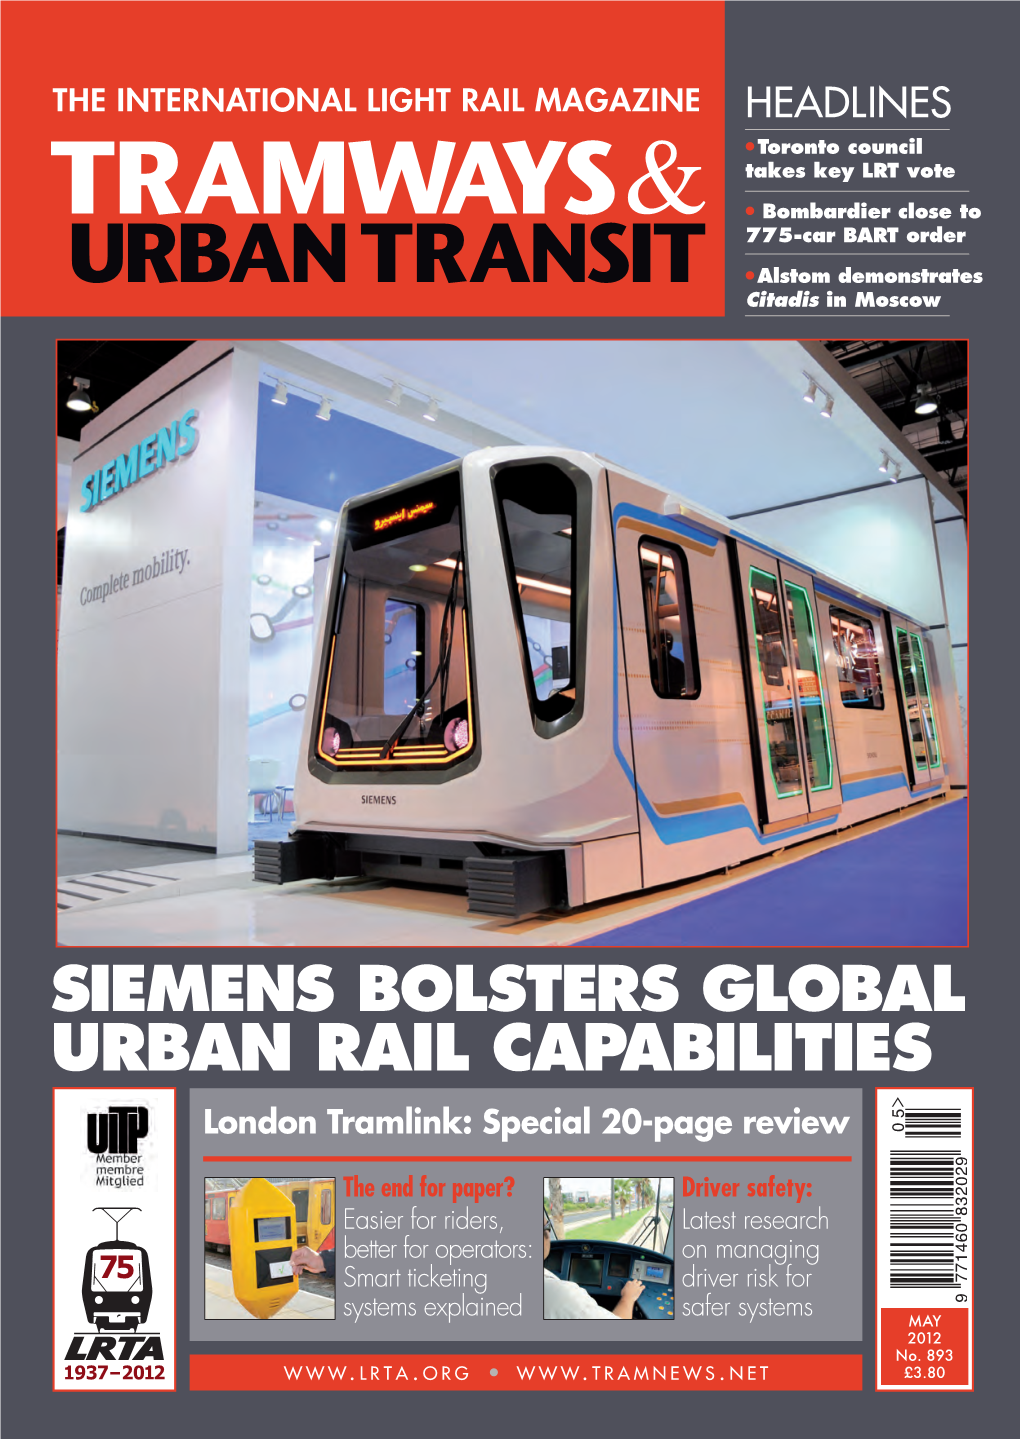 URBAN RAIL CAPABILITIES London Tramlink: Special 20-Page Review